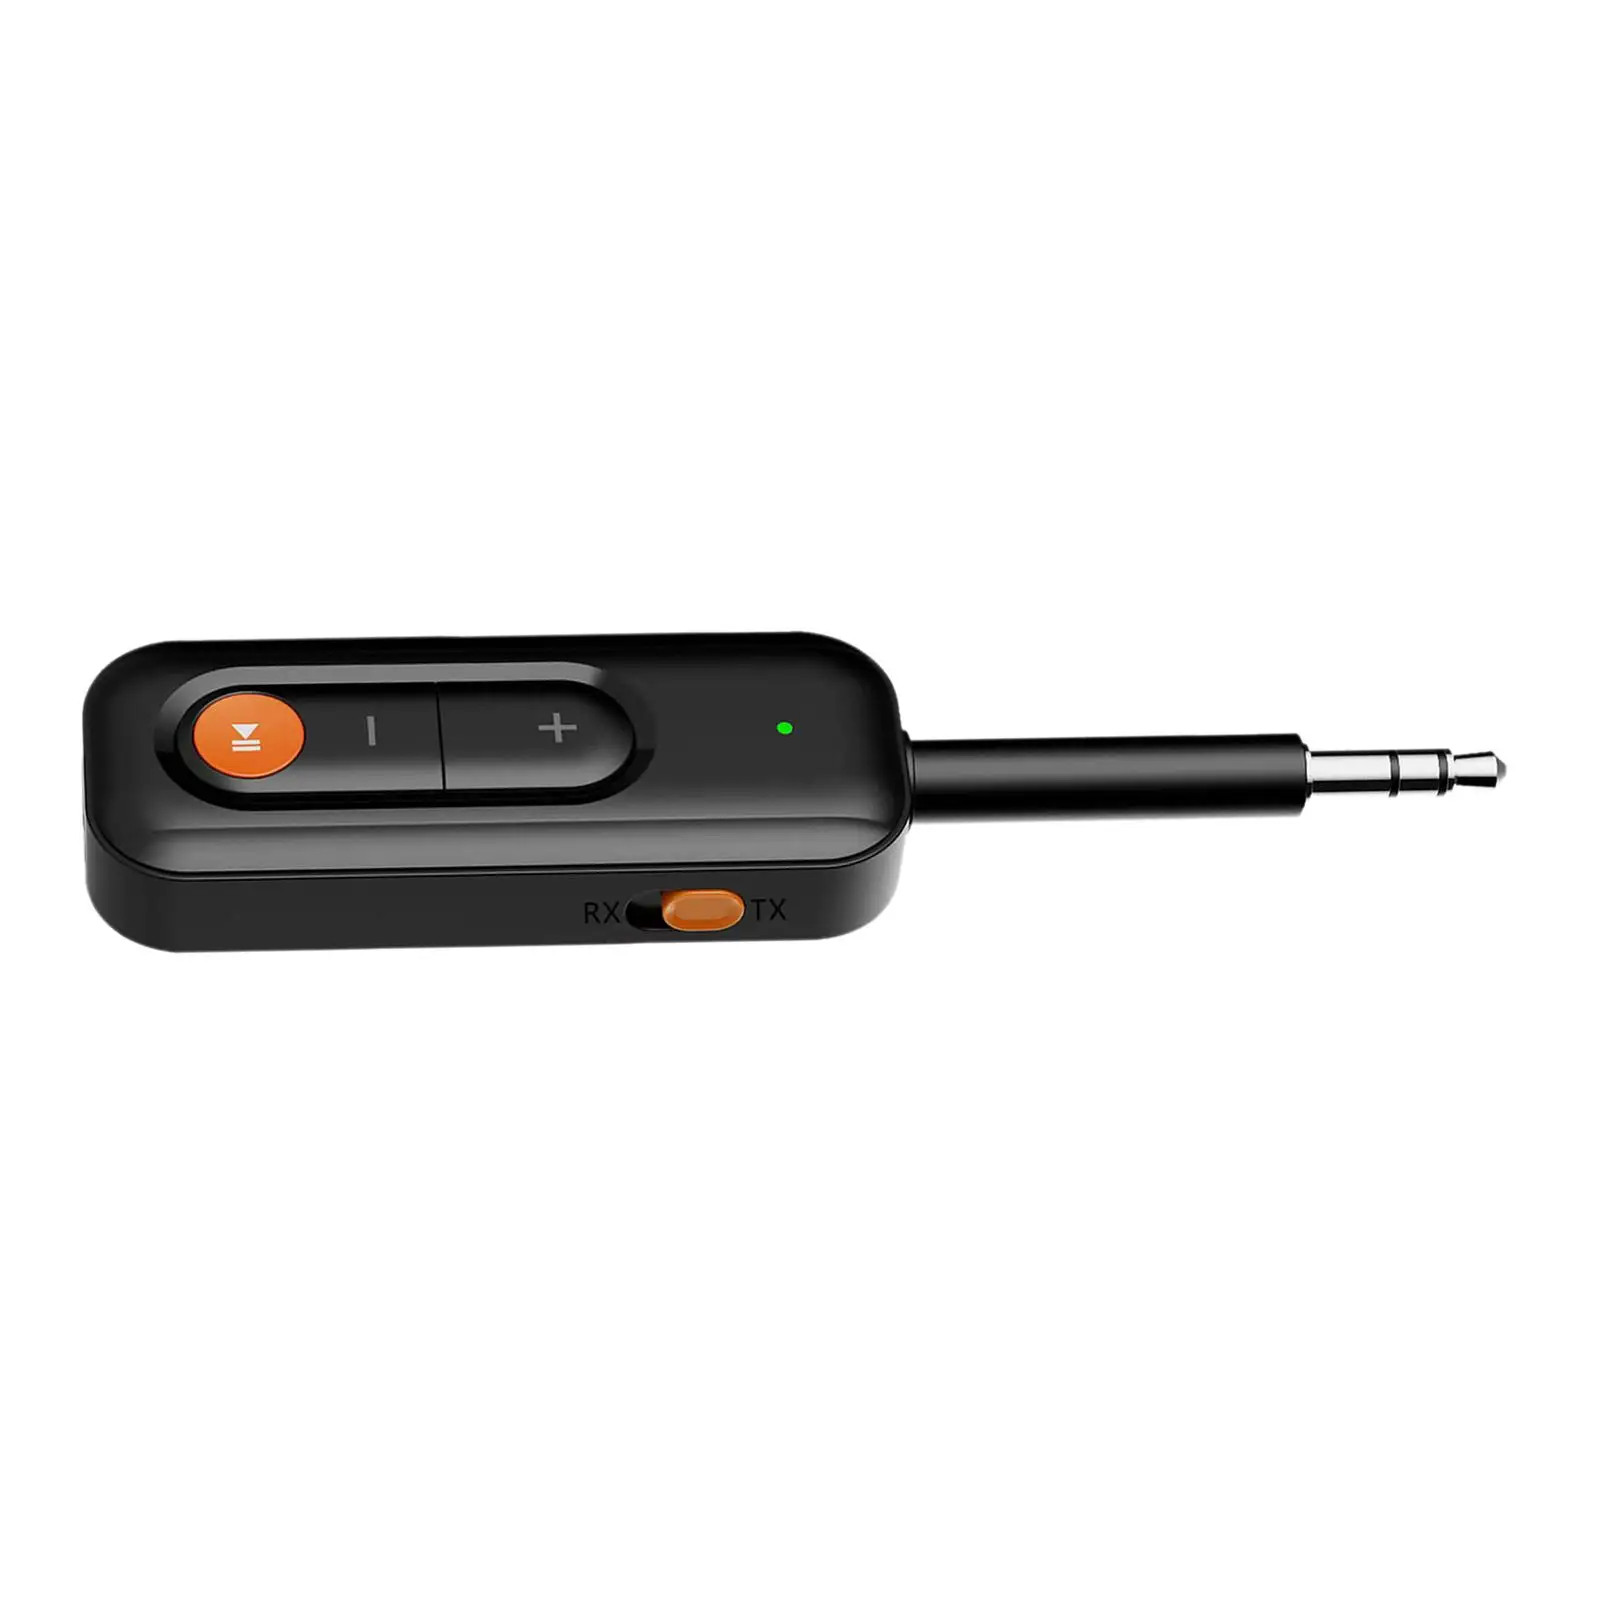 Audio Transmitter and Receiver Transceiver 3.5mm 2 in 1 Car AUX Audio Adapter for Computers speaker Amplifier Car Audio